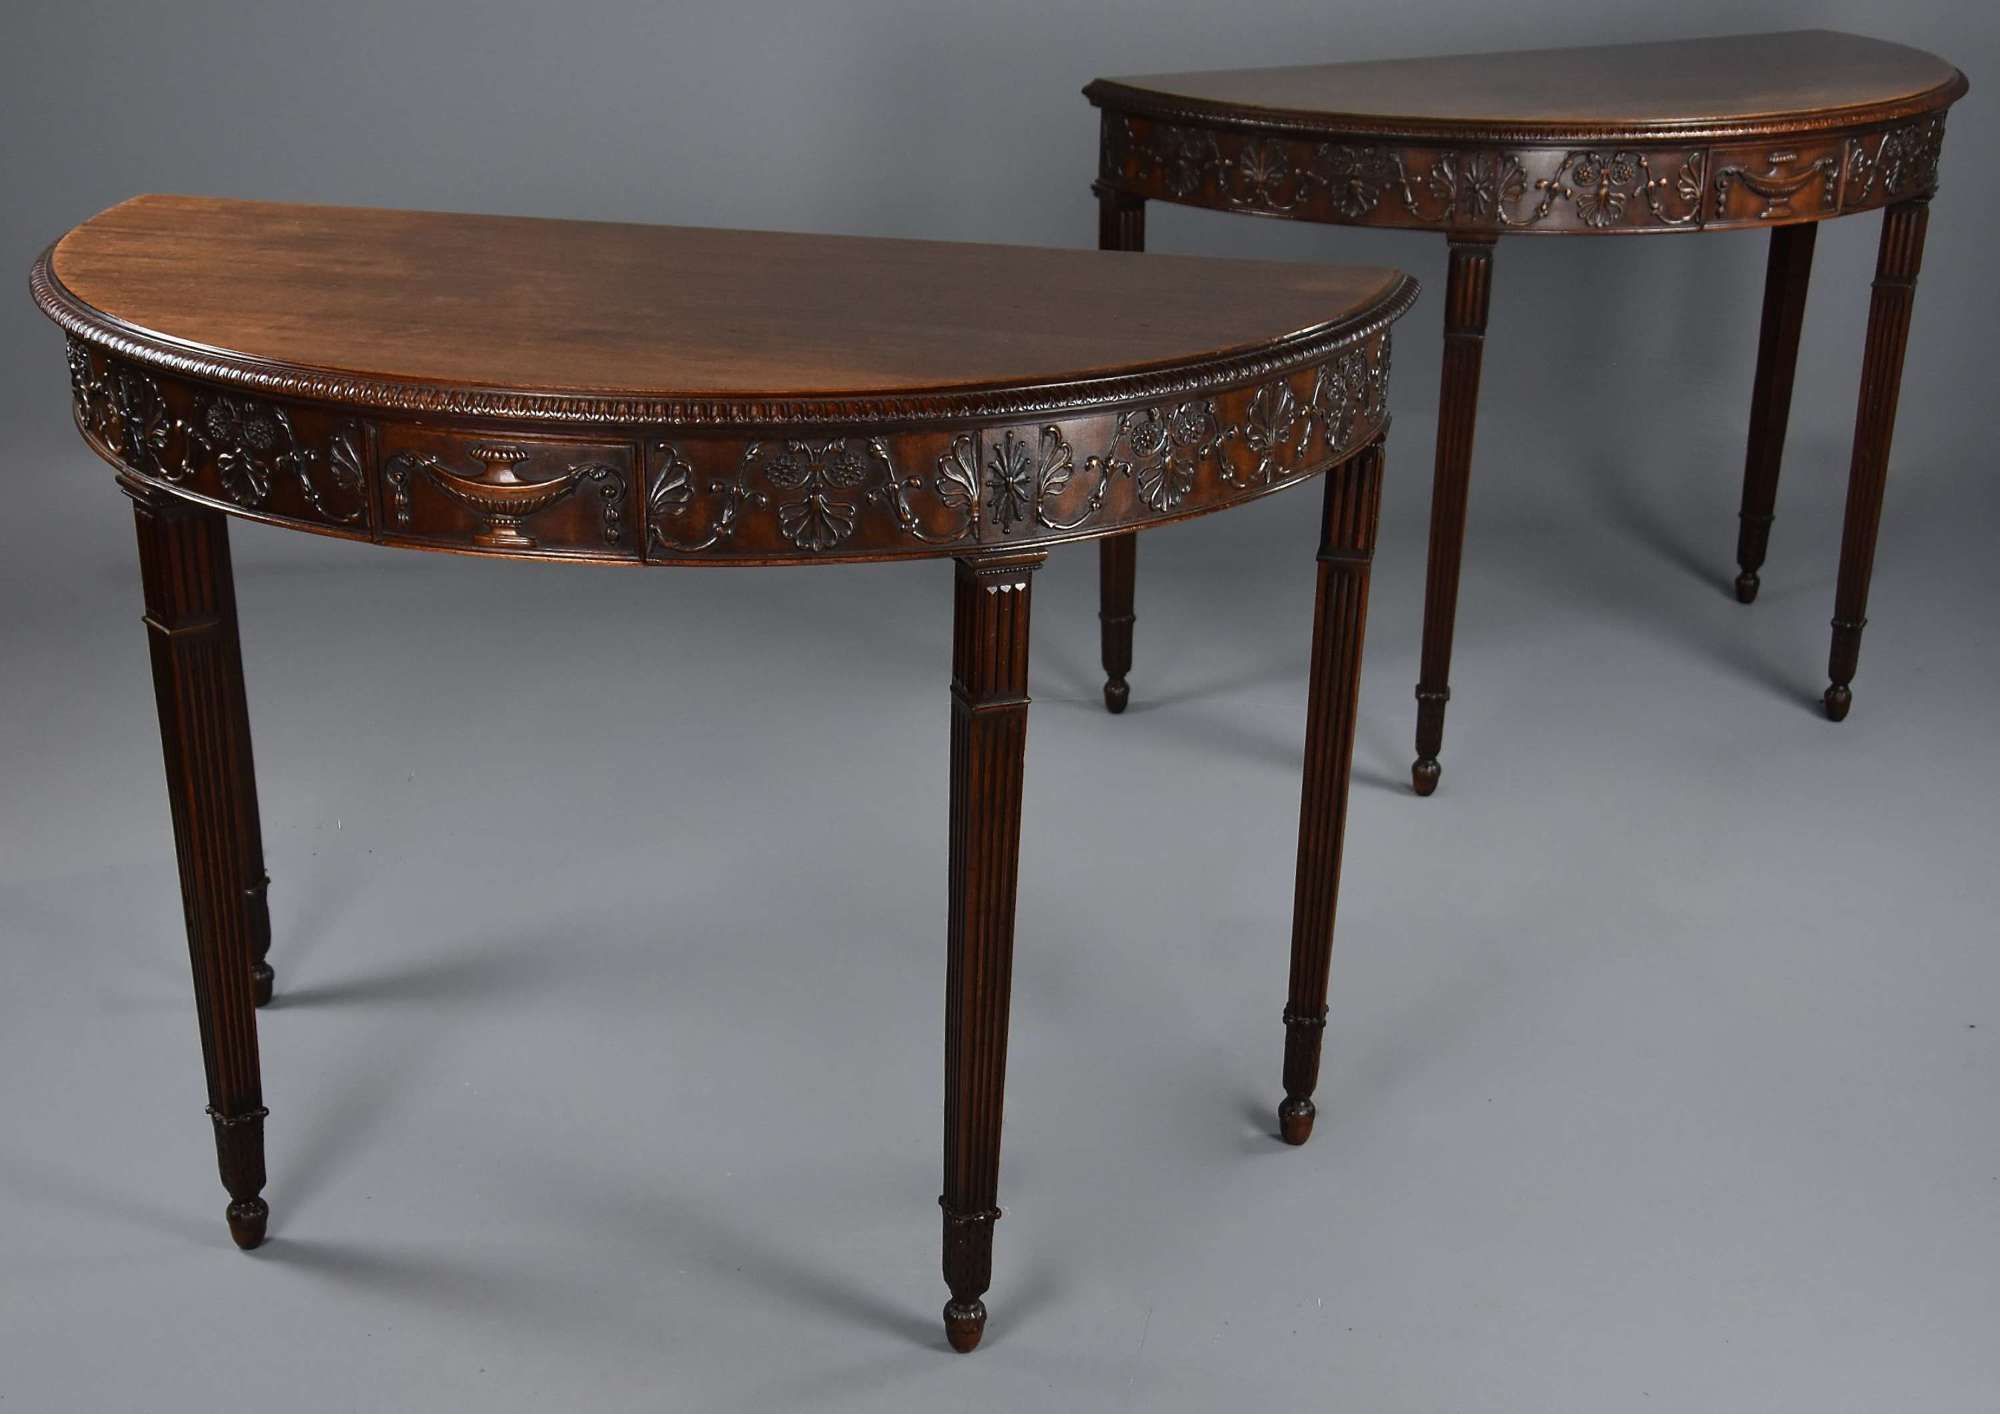 Superb pair of late 19thc mahogany demi-lune console tables